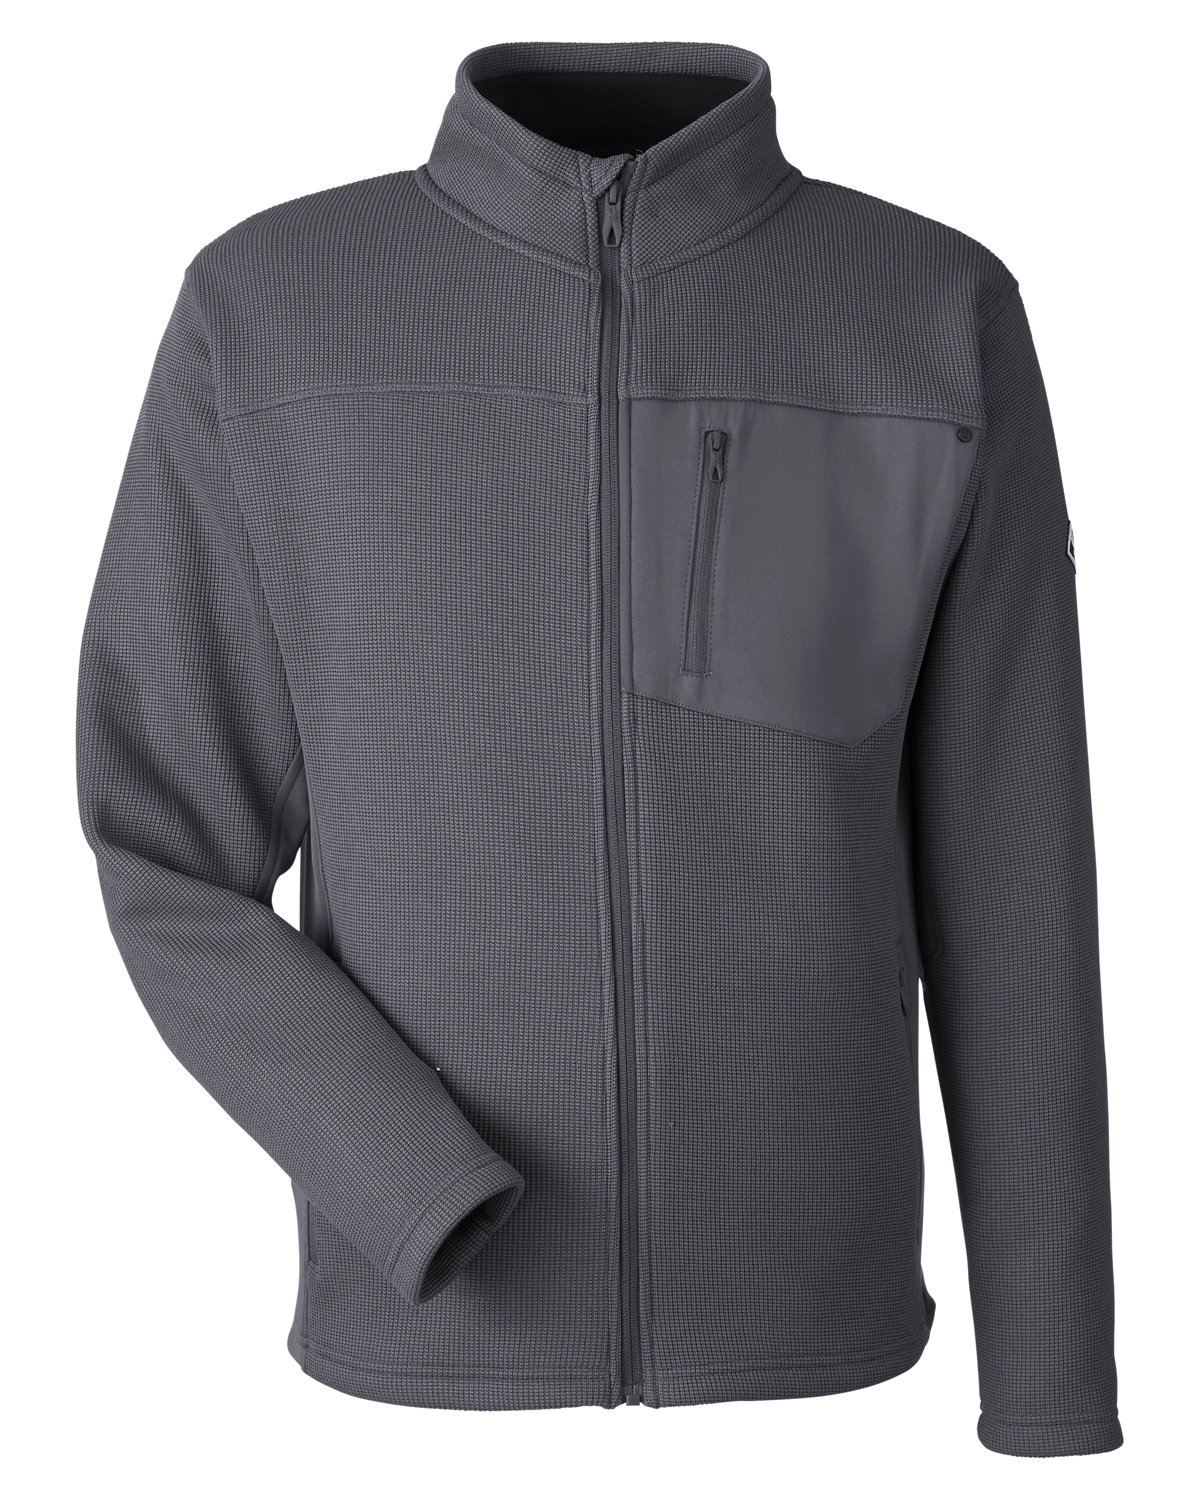 Spyder S17936 - Men's Constant Canyon Sweater